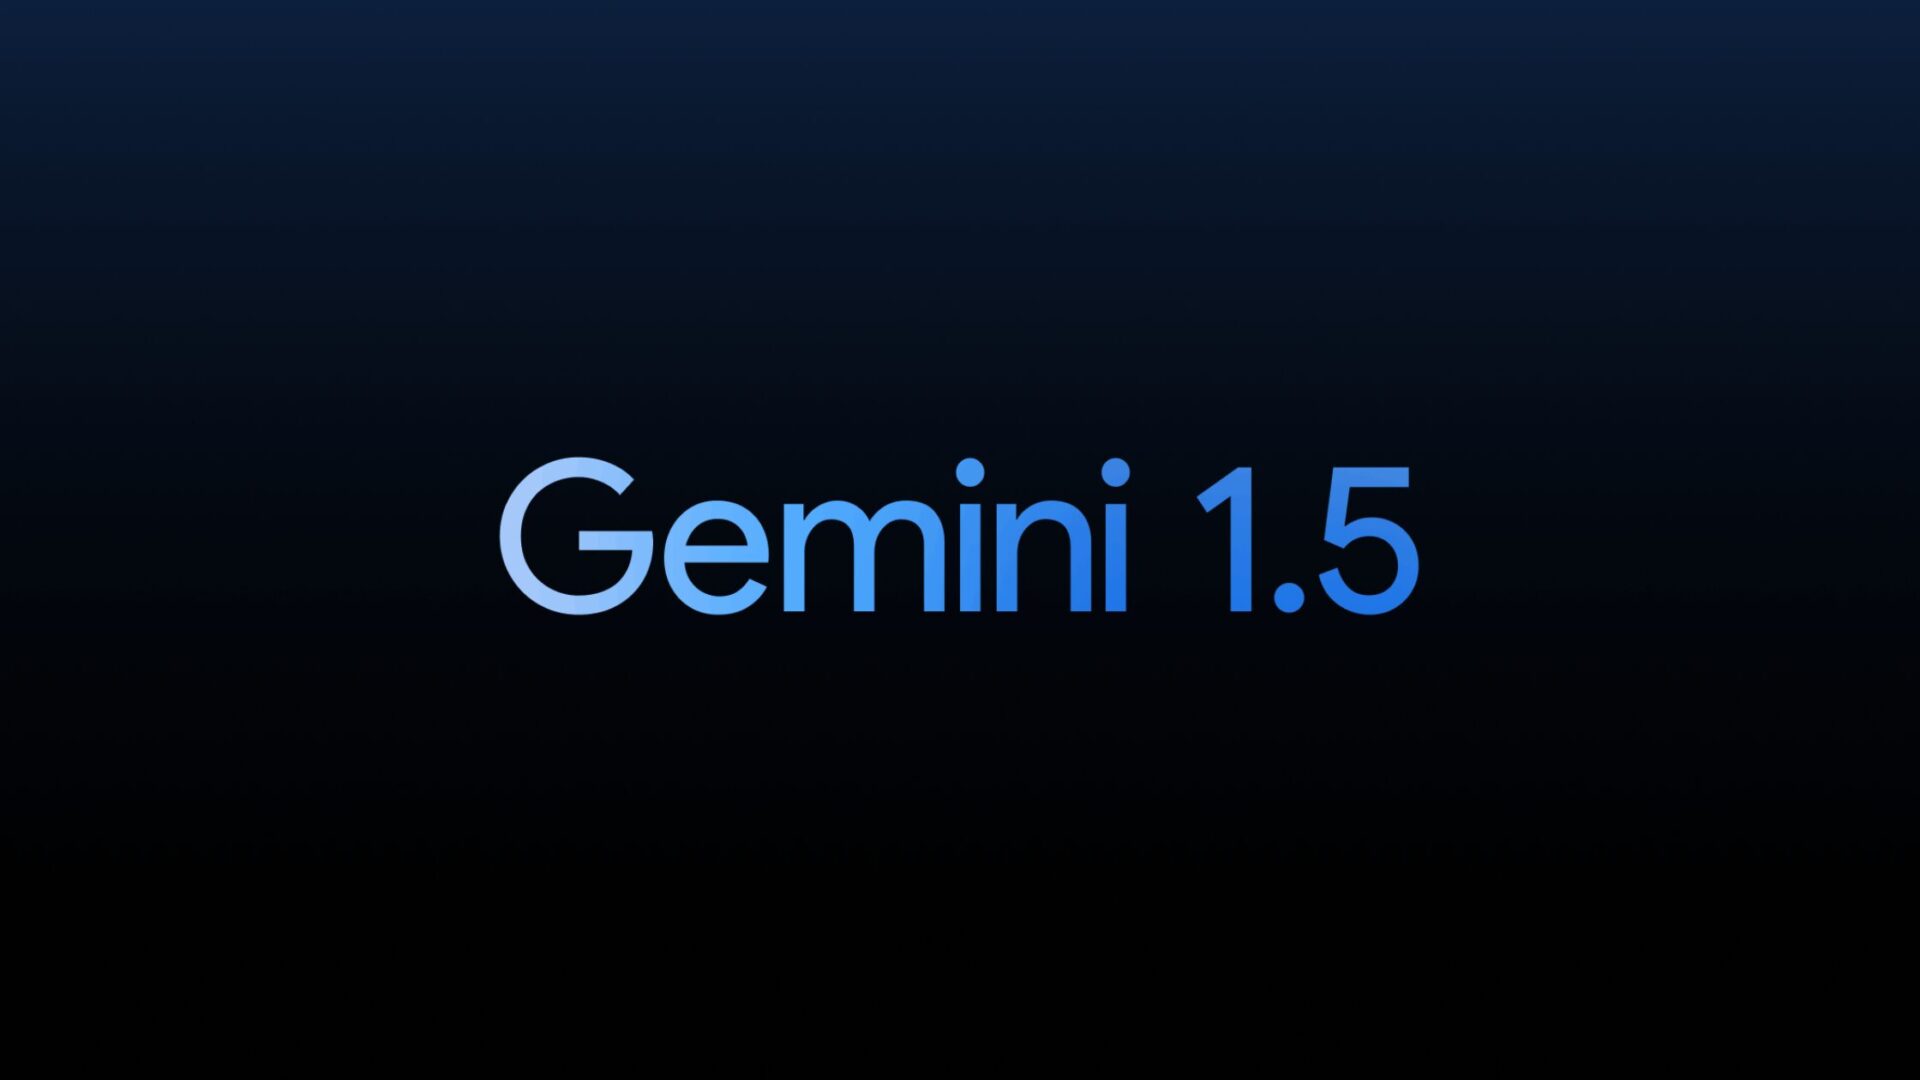 Google Gemini 1.5 is Out Now With Amazing New Capabilities